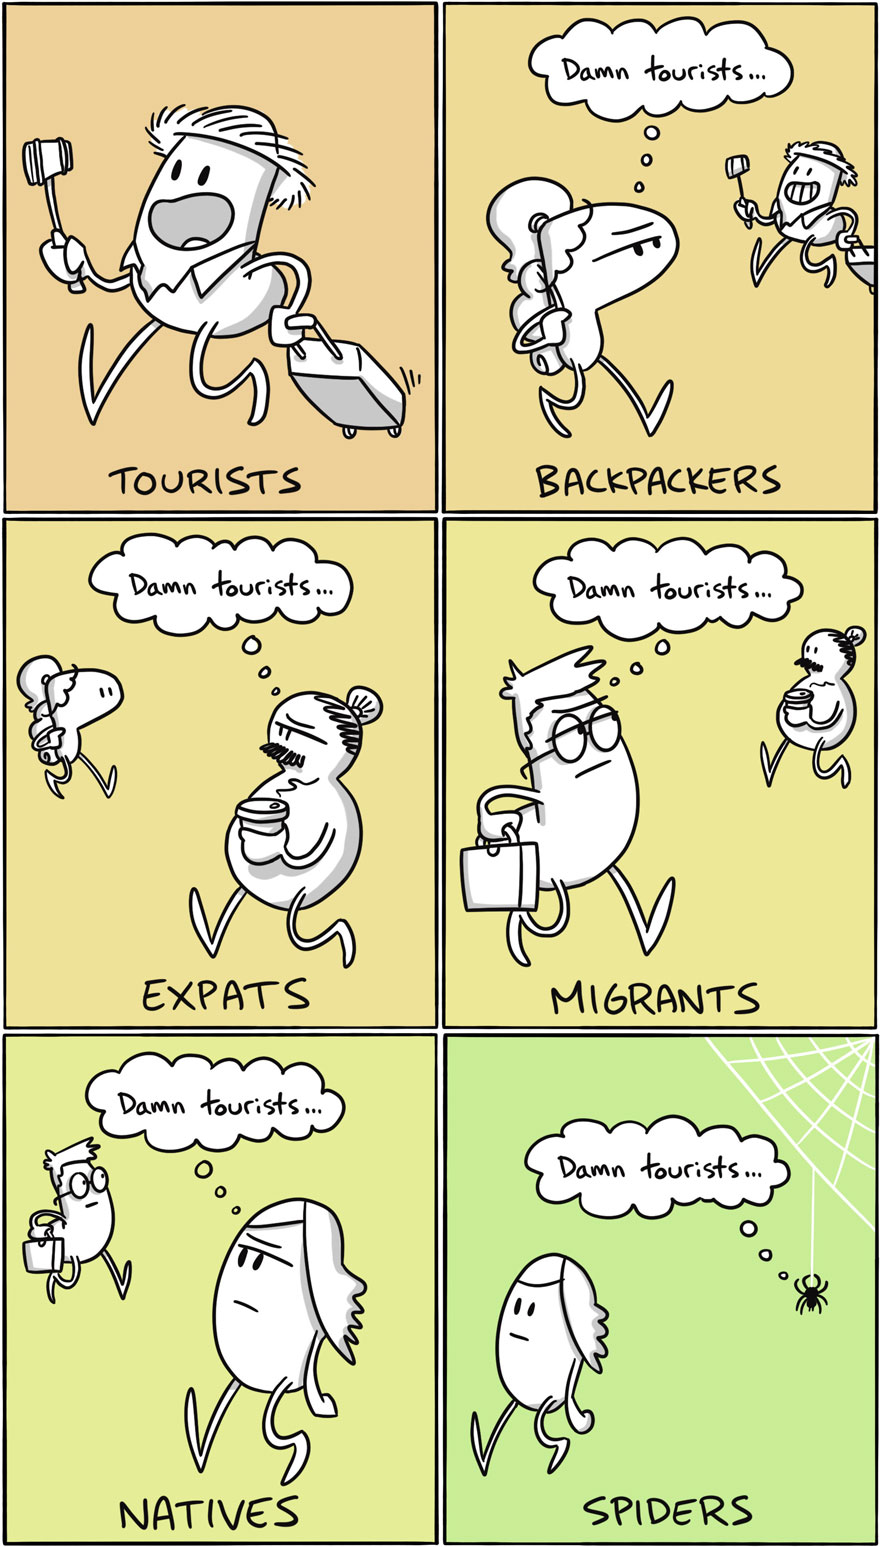 Artist Hilariously Illustrates The Differences Between Different Countries And Languages (New Pics)